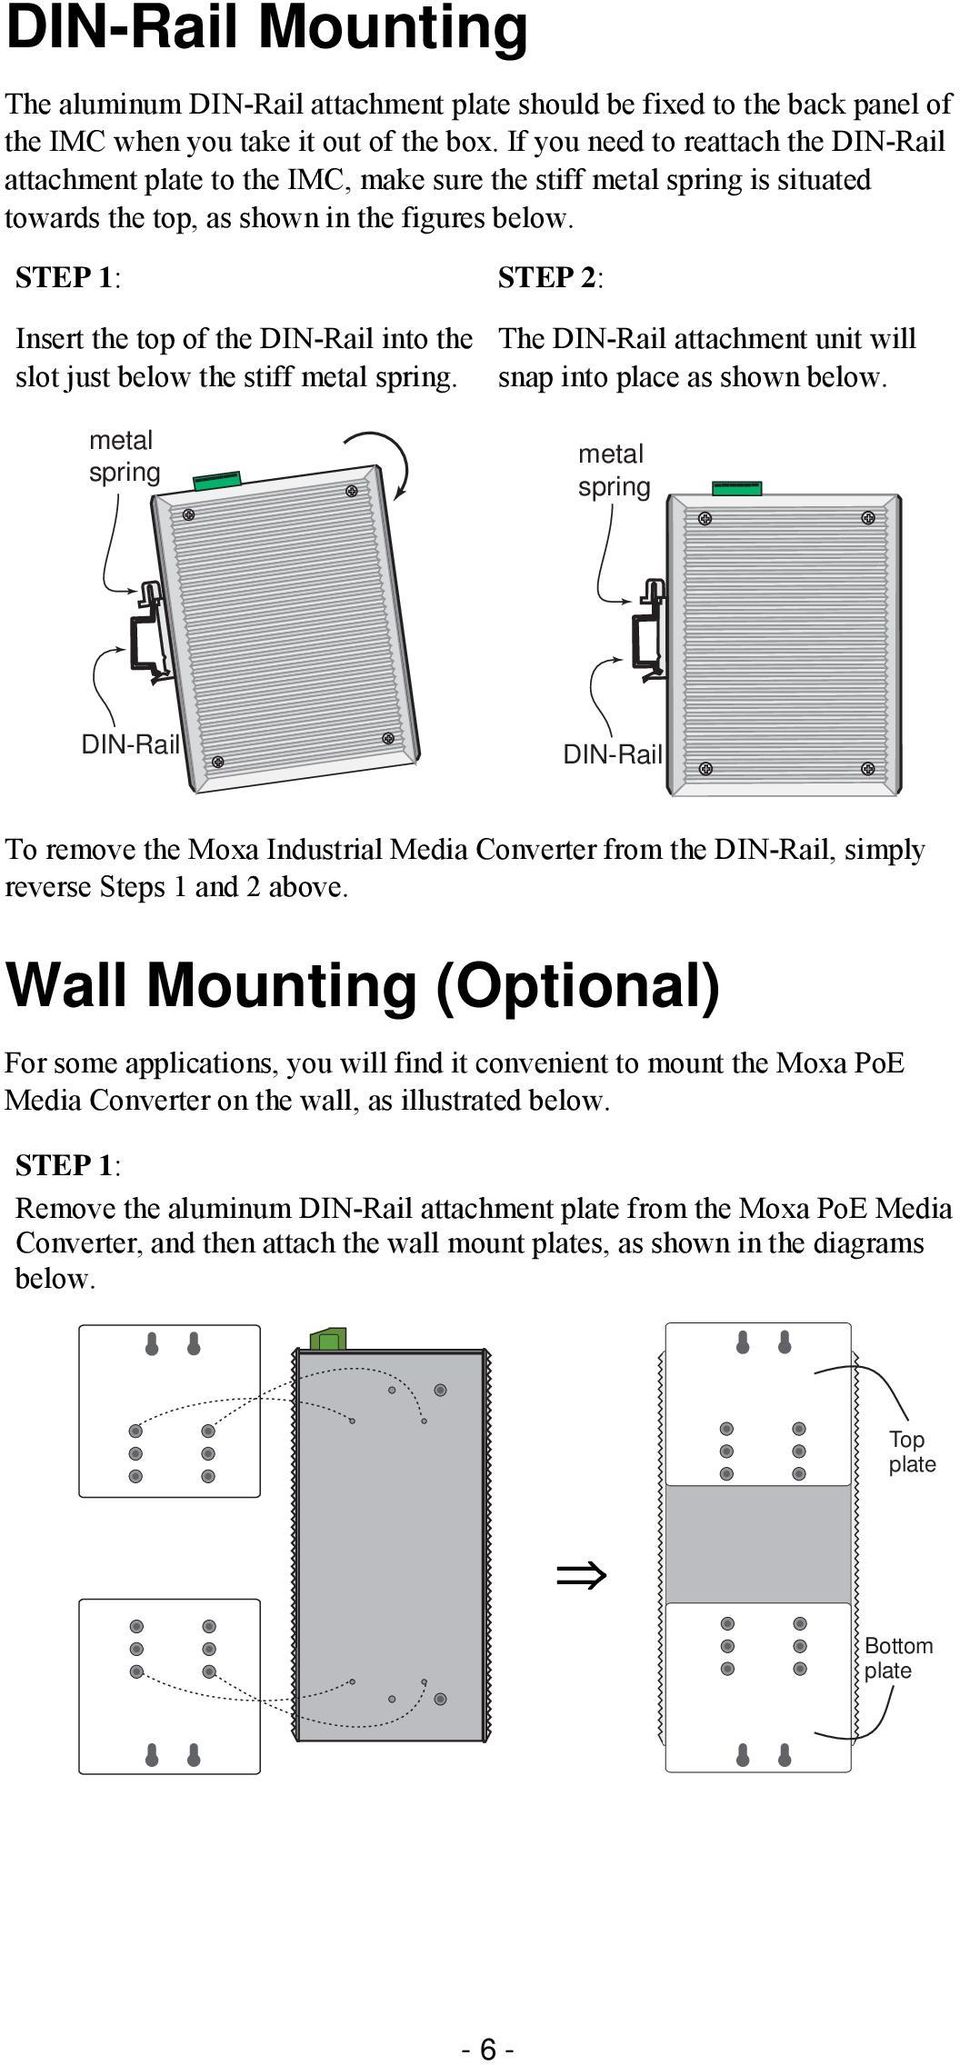 STEP 1: Insert the top of the DIN-Rail into the slot just below the stiff metal spring. metal spring STEP 2: The DIN-Rail attachment unit will snap into place as shown below.